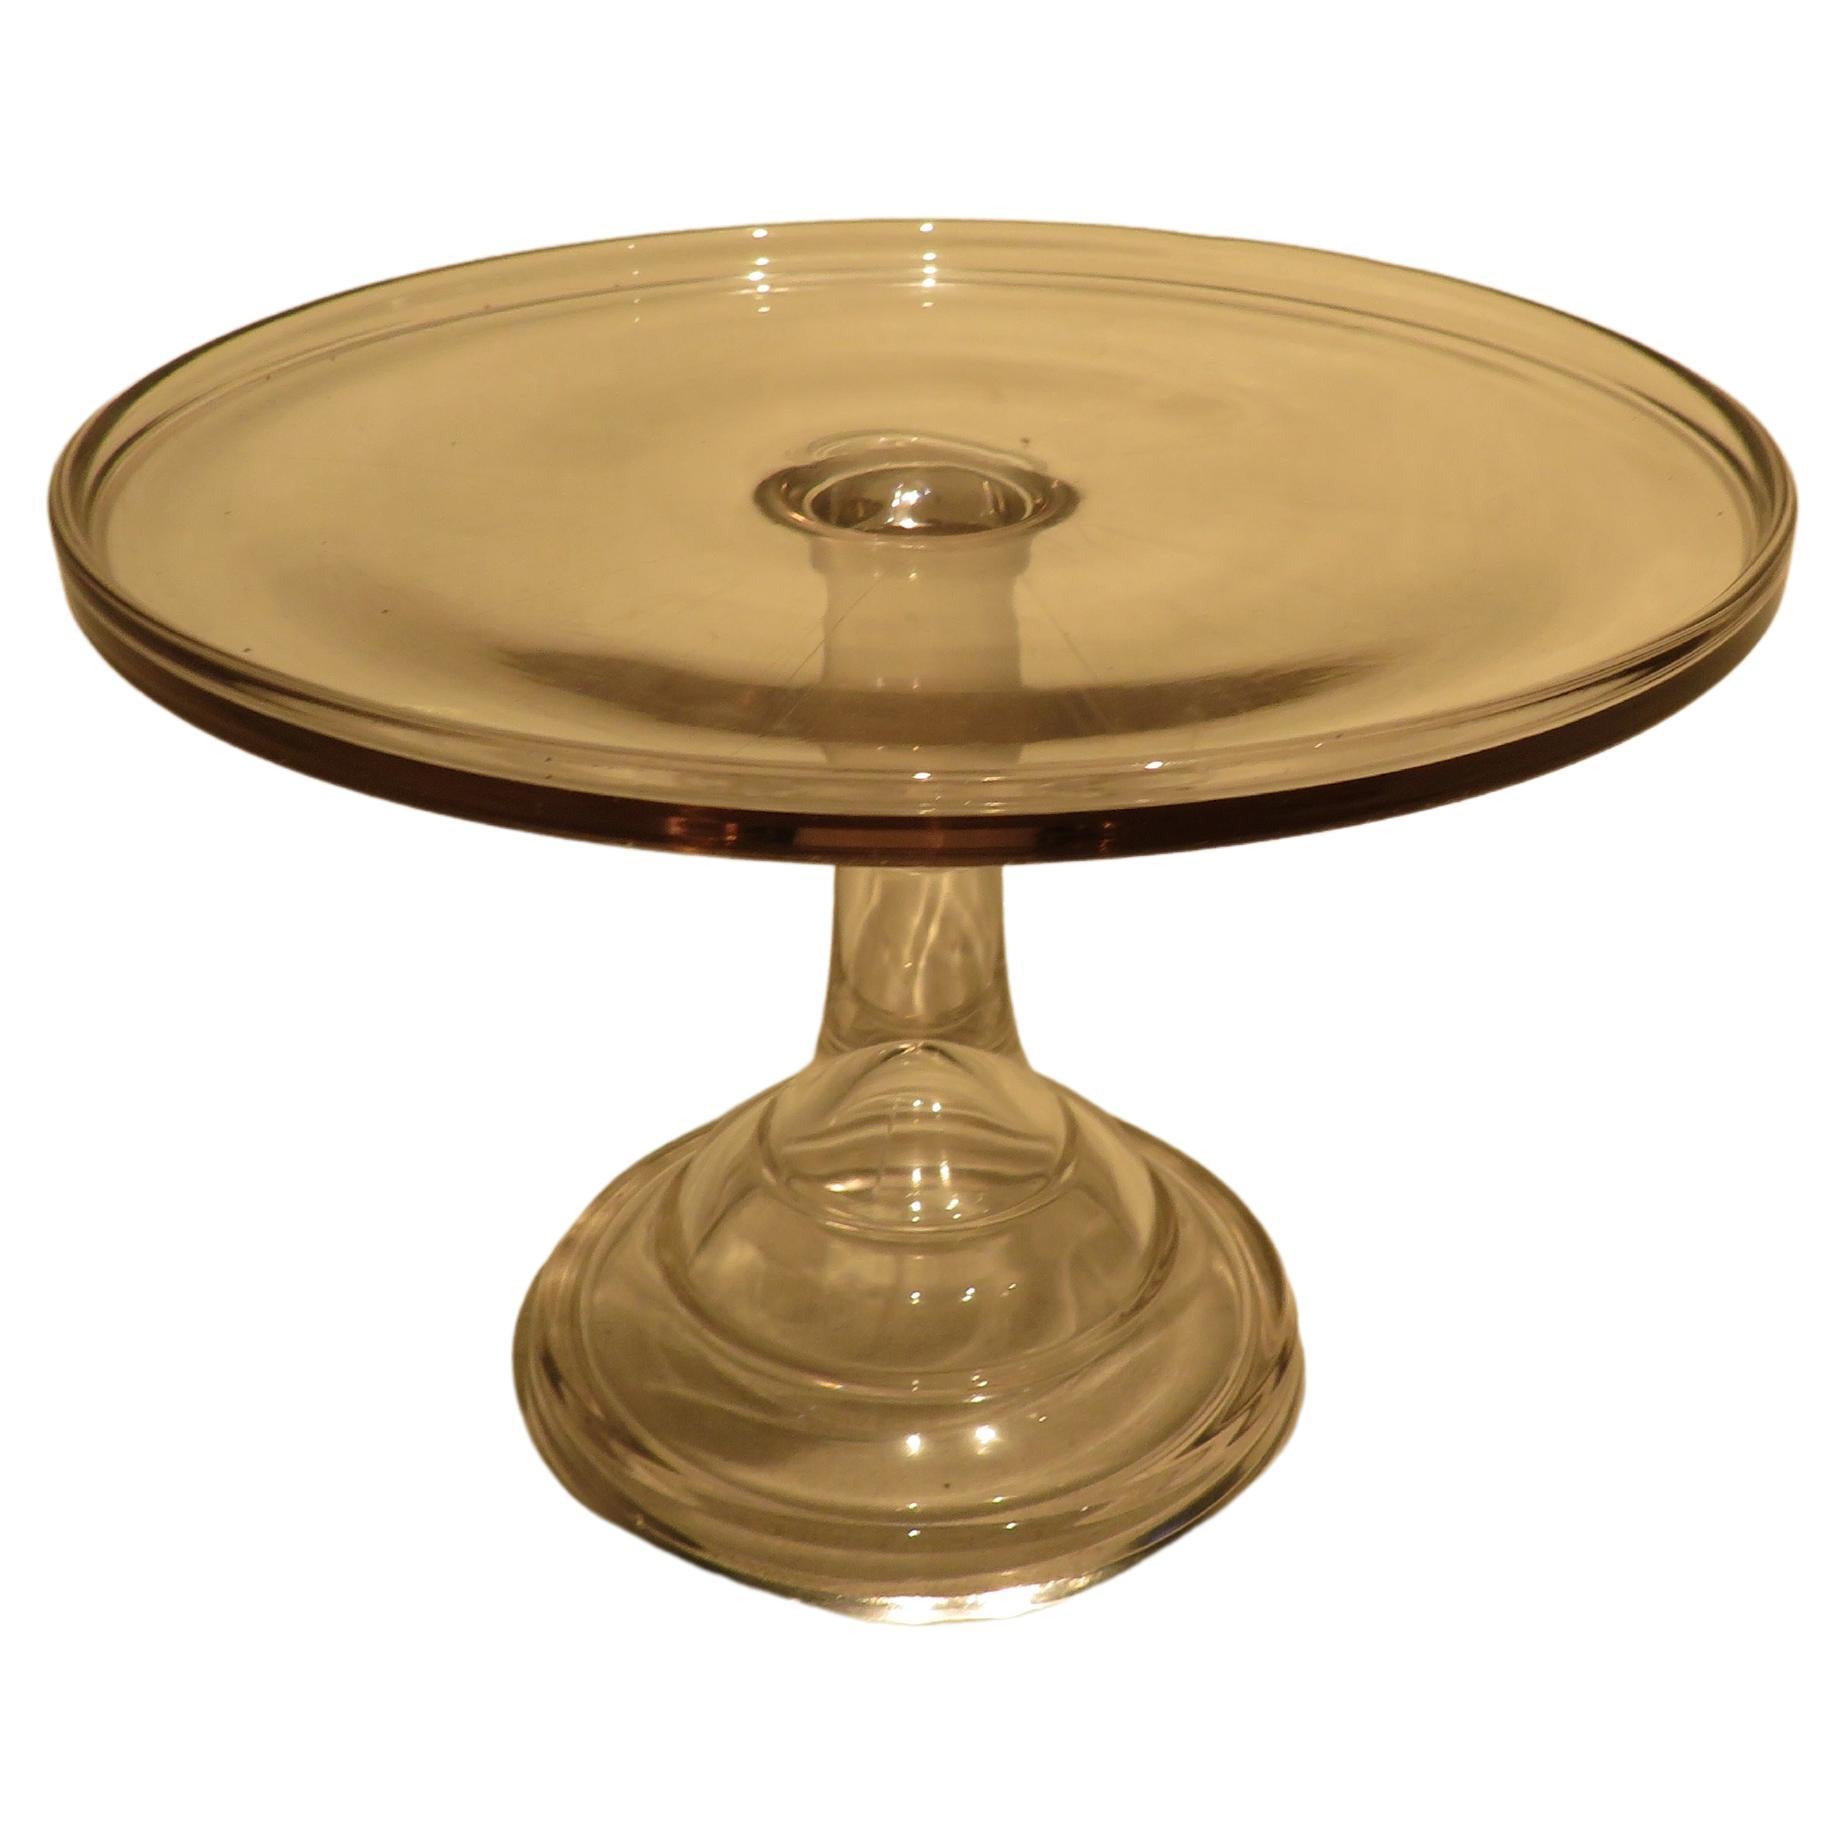 Early 20th Century Turn of the Century Pittsburgh Glass Cake Stand For Sale